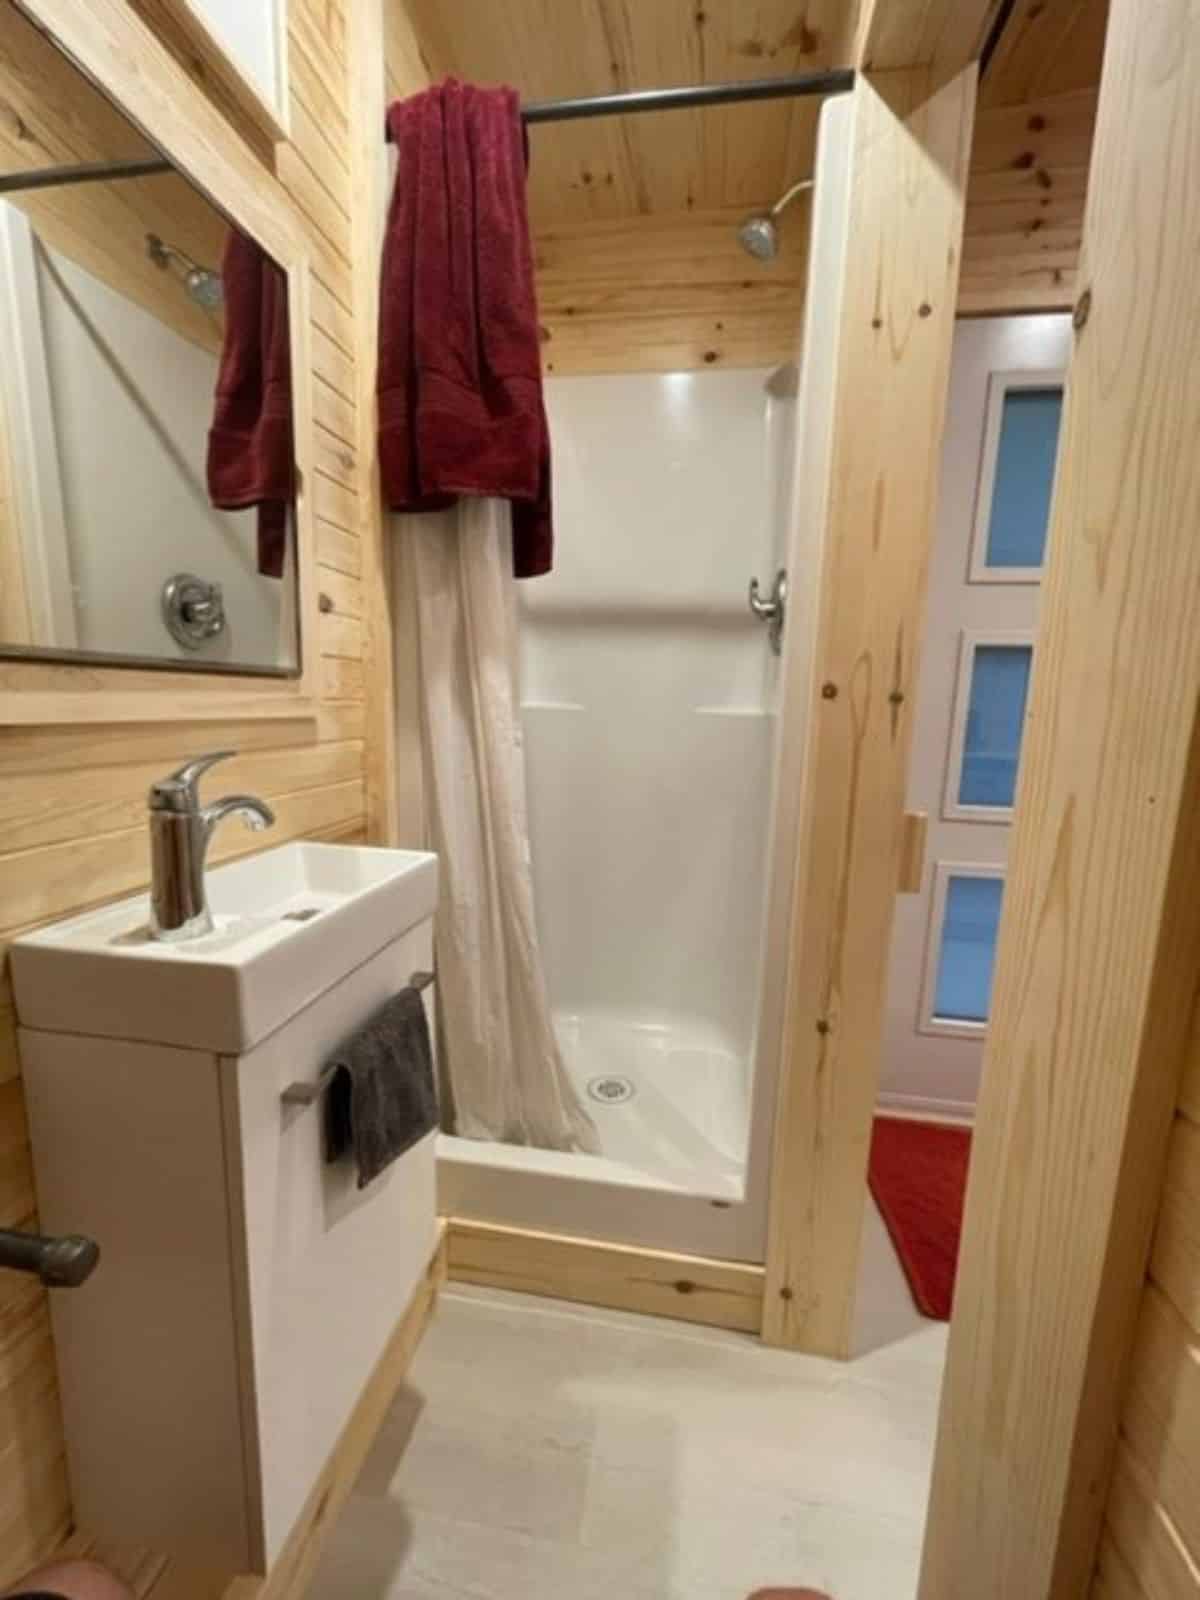 Bathroom of This Elegant Tiny Home  has a sink with vanity & mirror, separate shower area and standard toilet